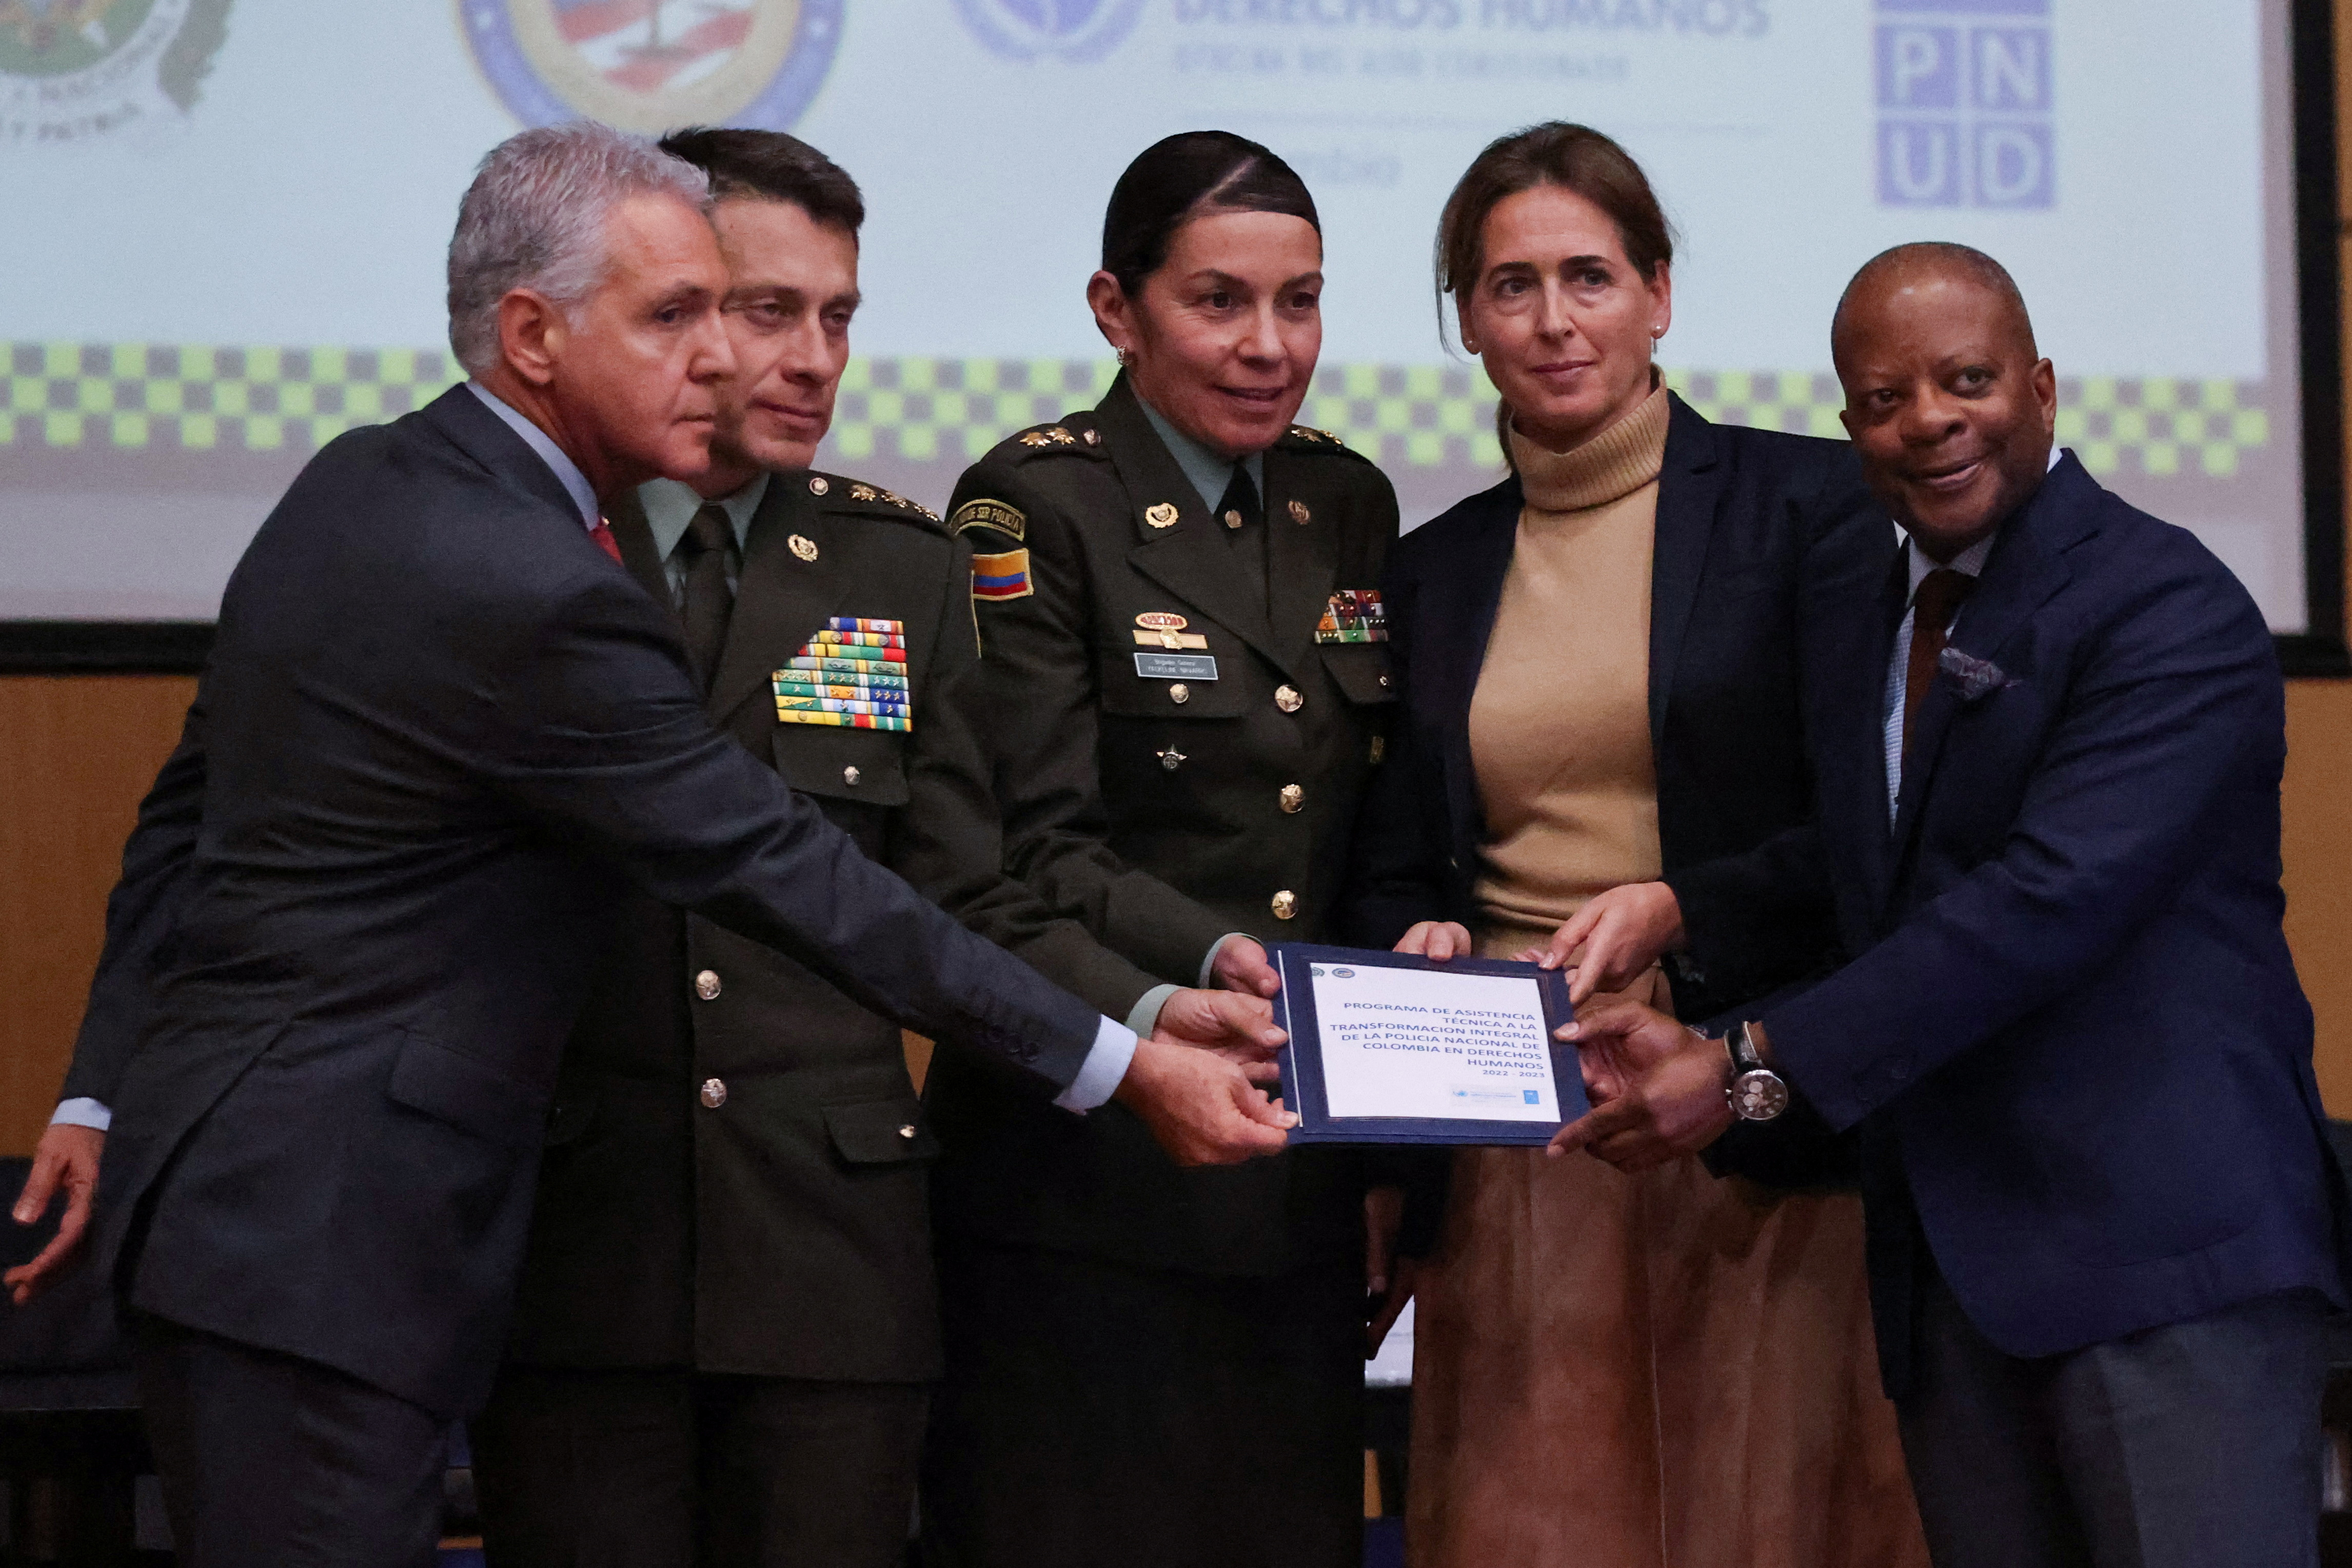 U.S., U.N. Support New Human Rights Training for Colombia Police